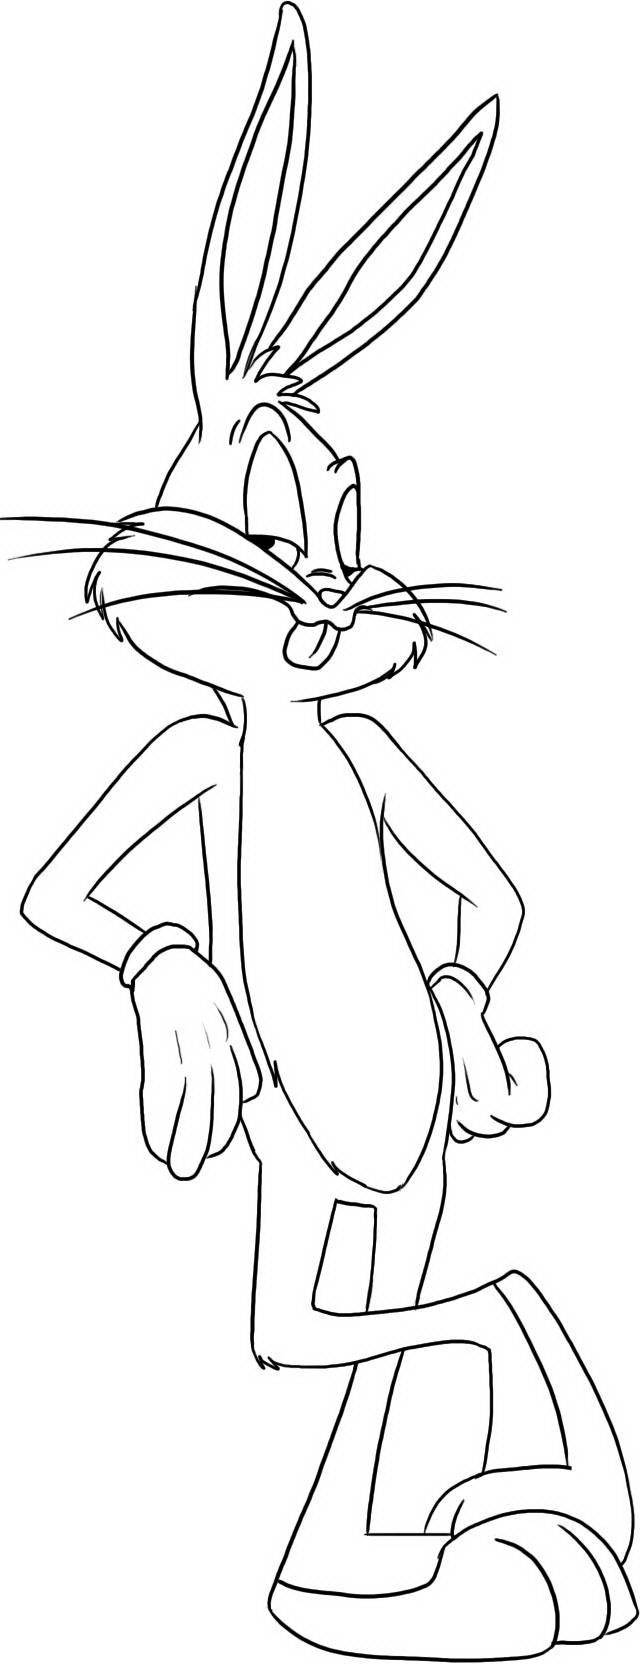 Coloring Figure of a hare bugs Bunny. Category Pets allowed. Tags:  cartoon rabbit.